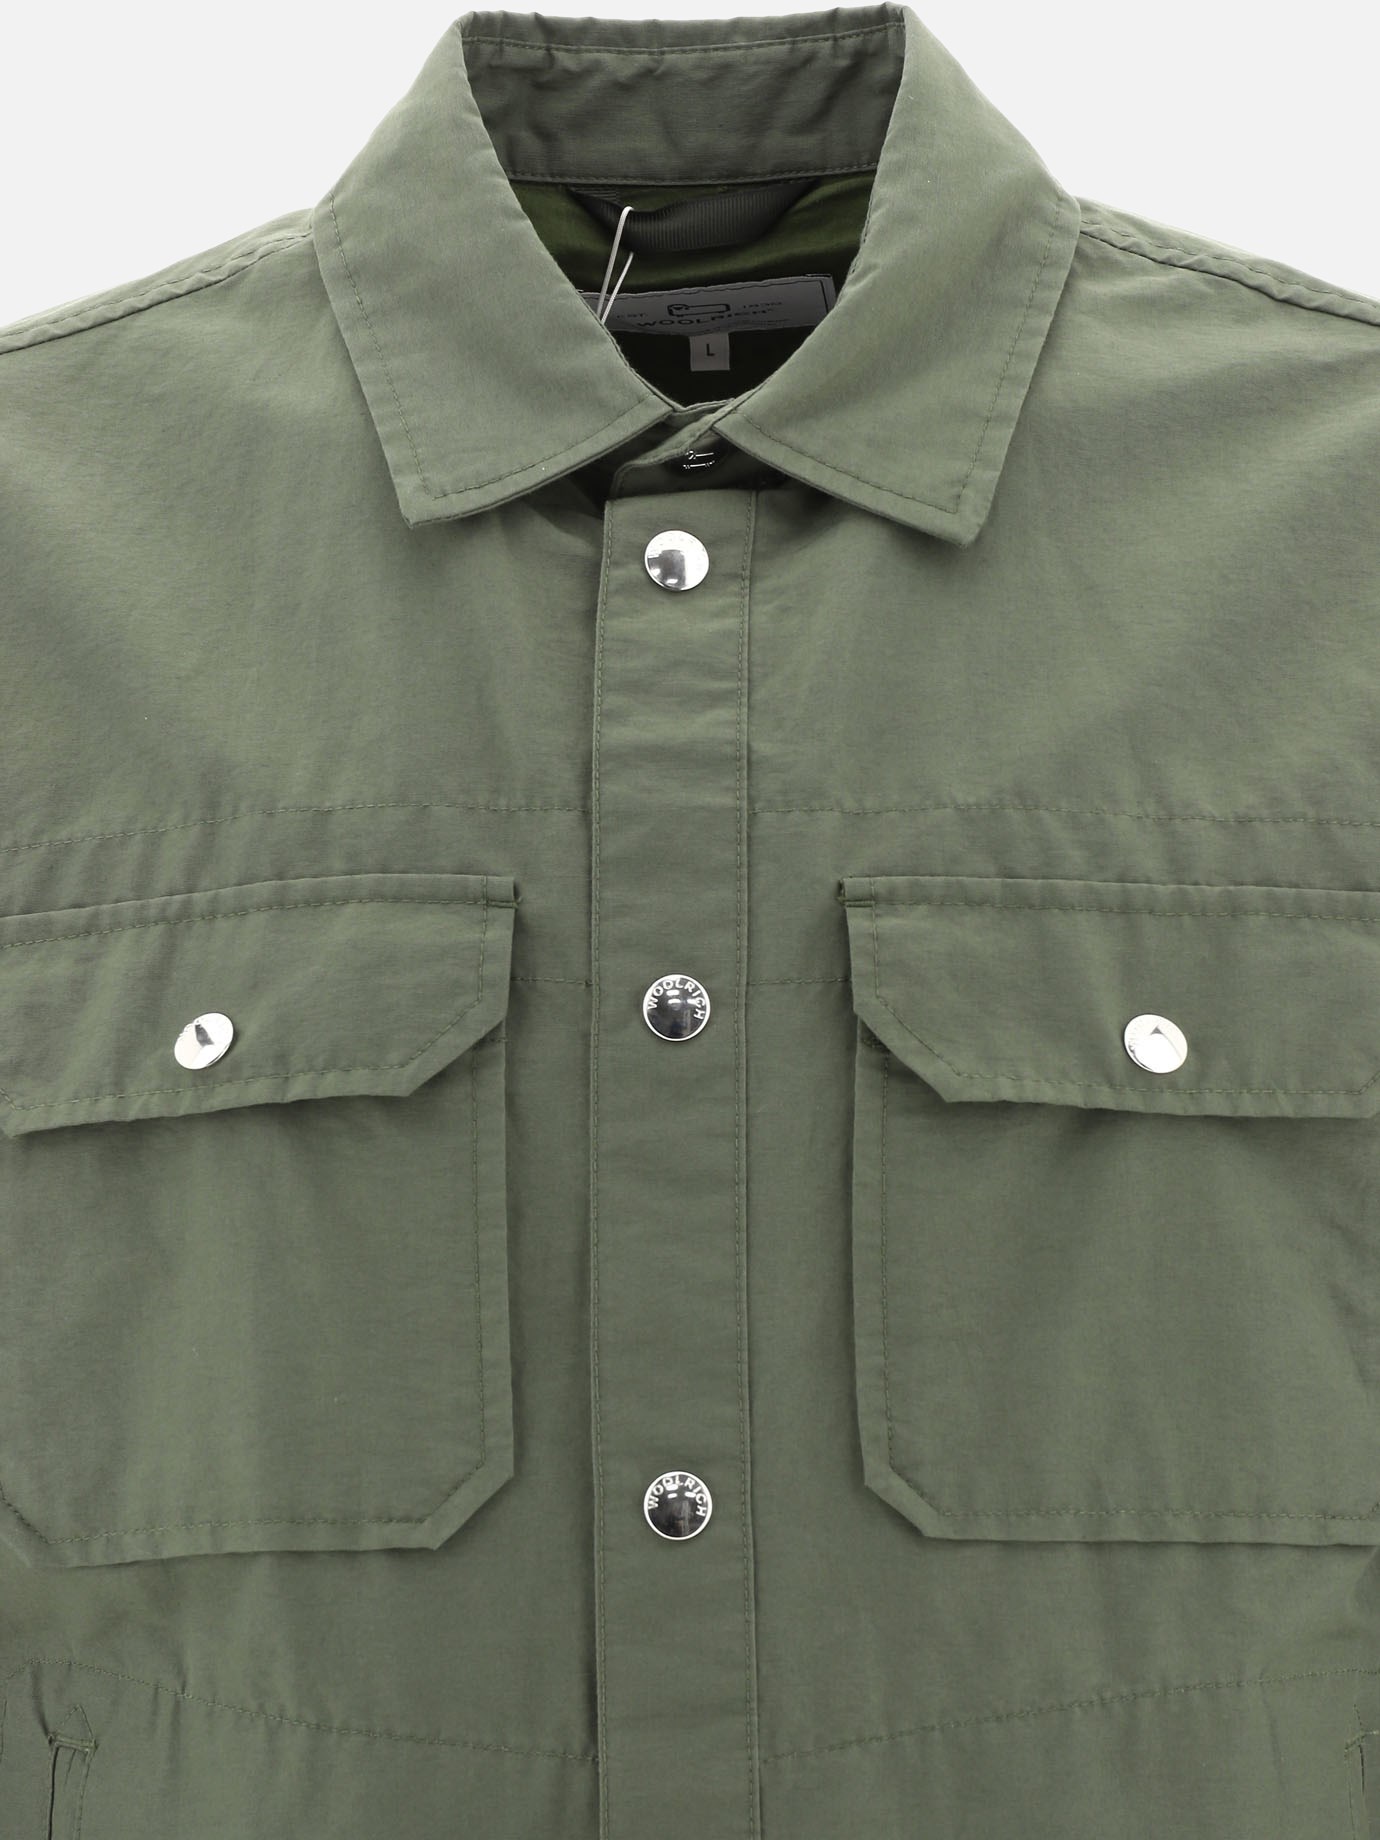  Cruiser Eco  overshirt by Woolrich